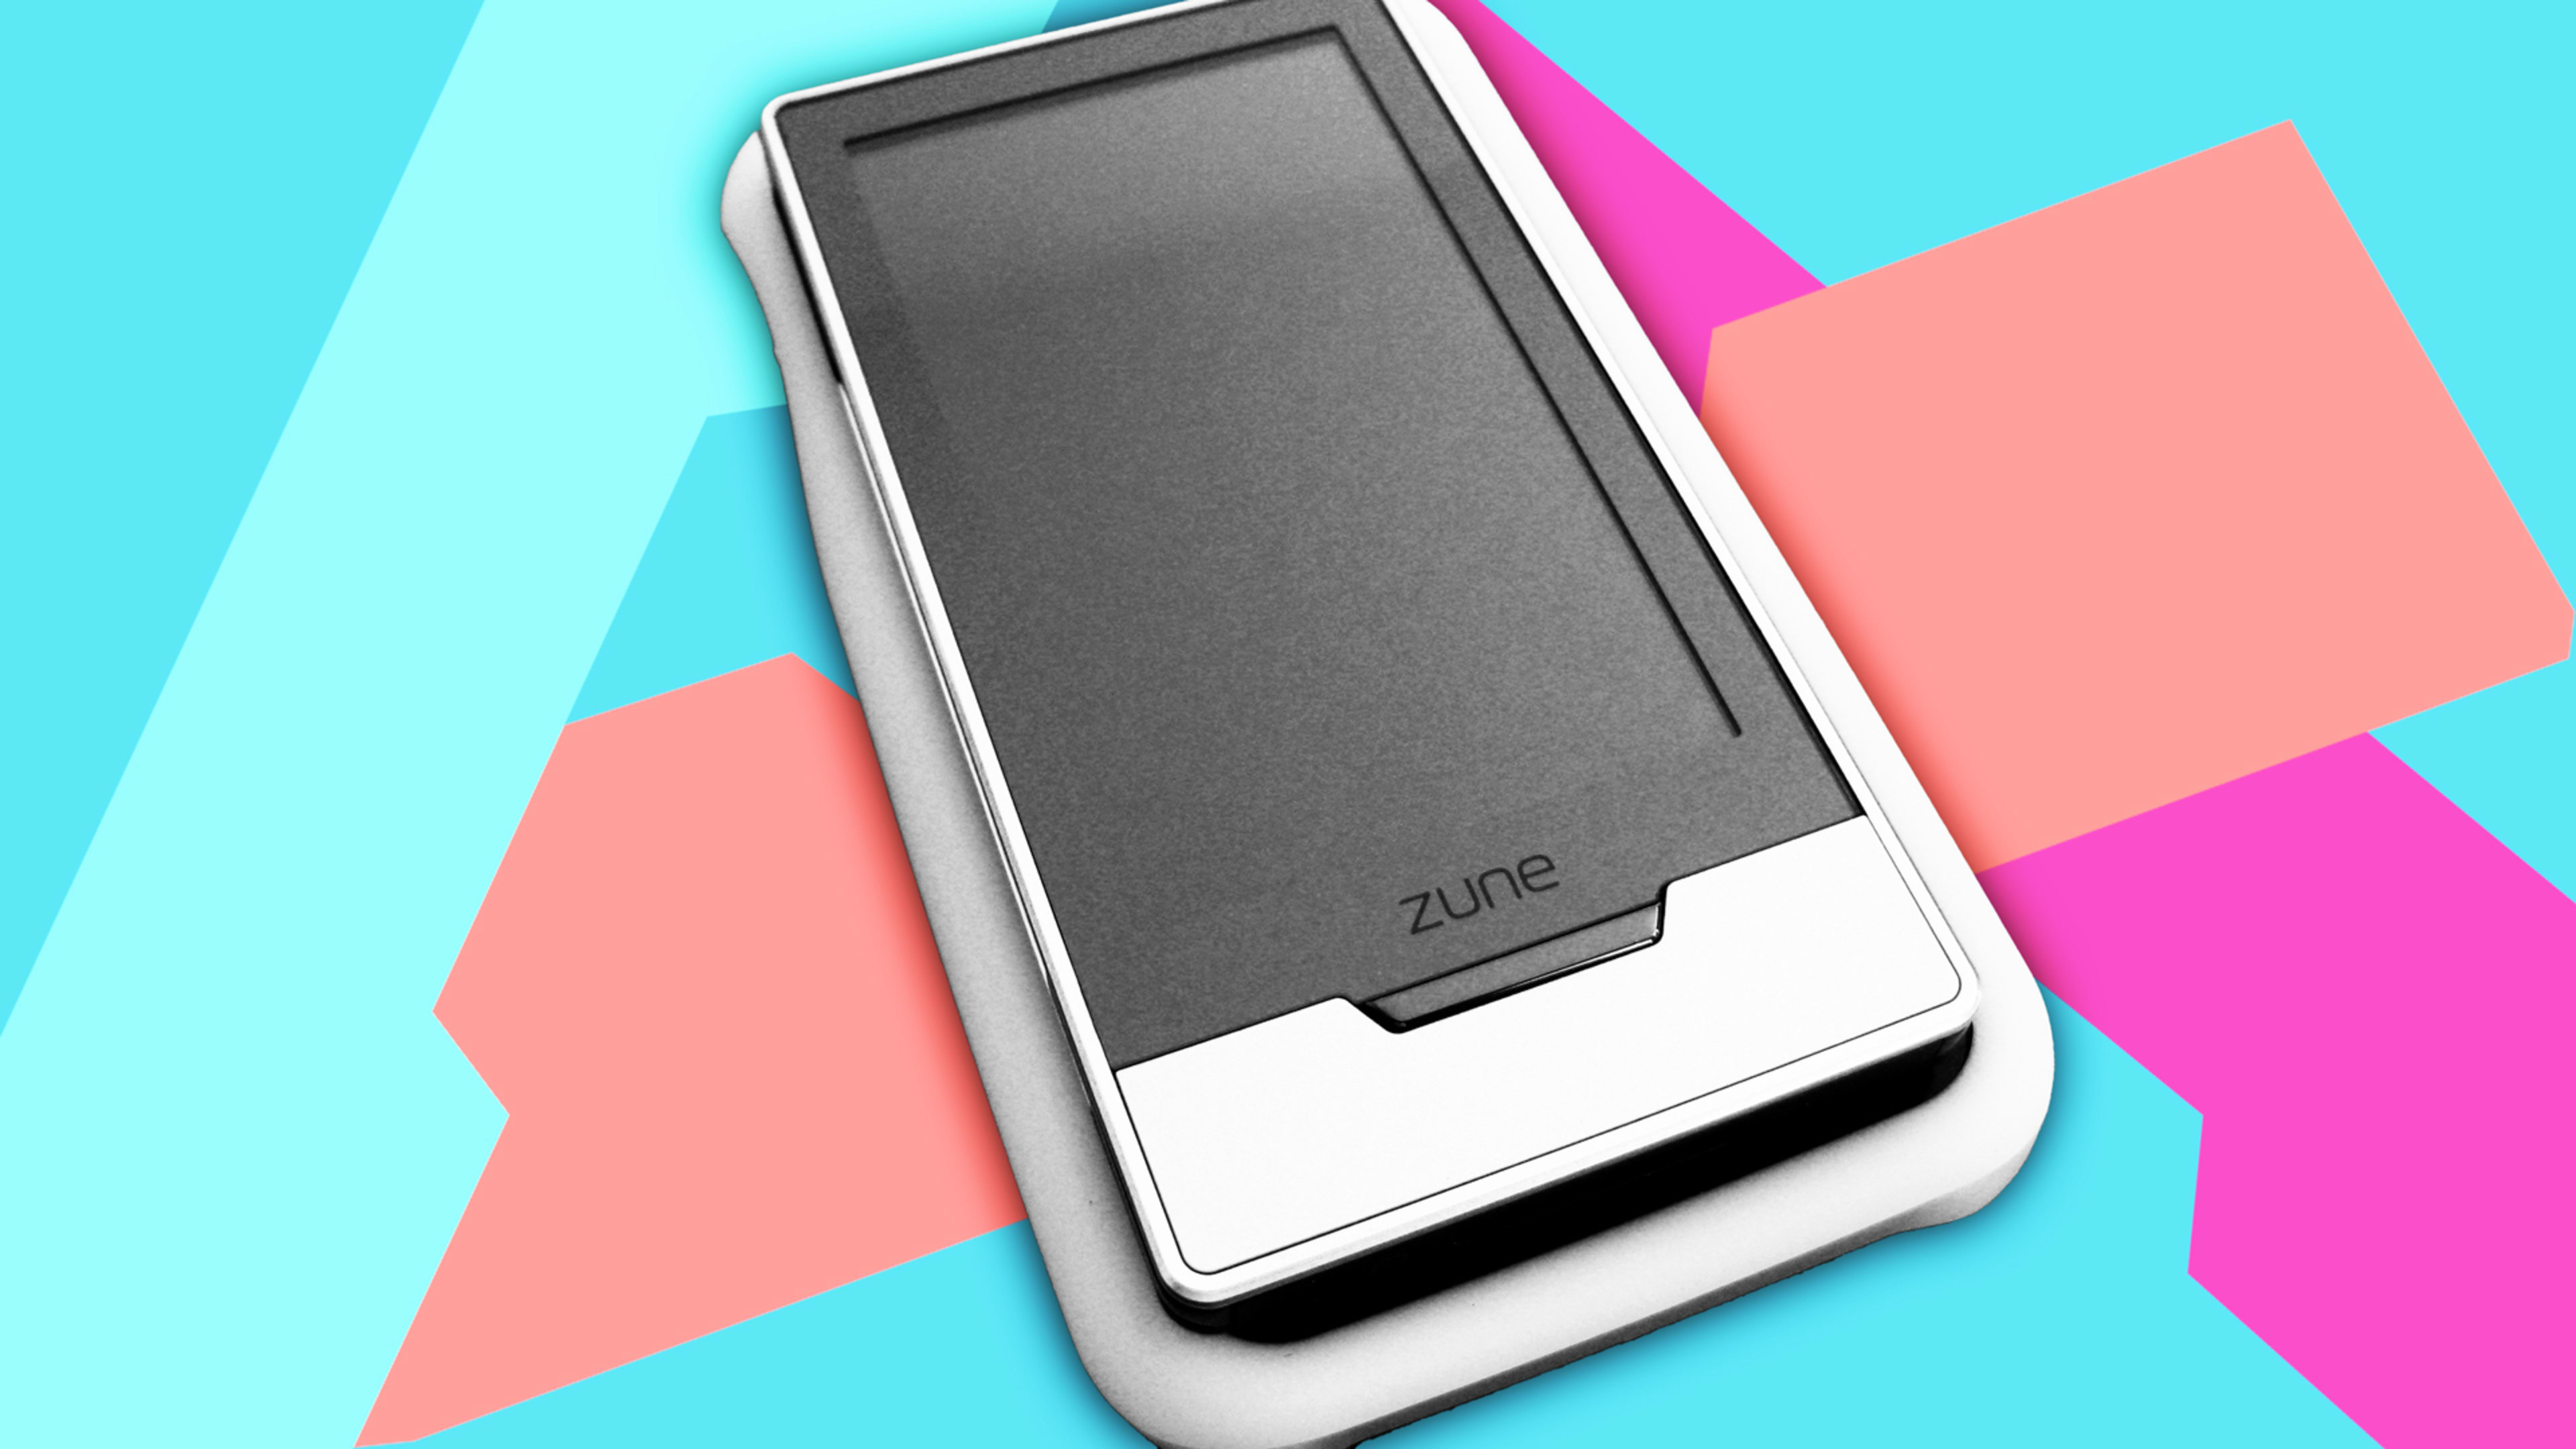 10 years after its demise, a requiem for the Microsoft Zune, the little gadget that couldn’t